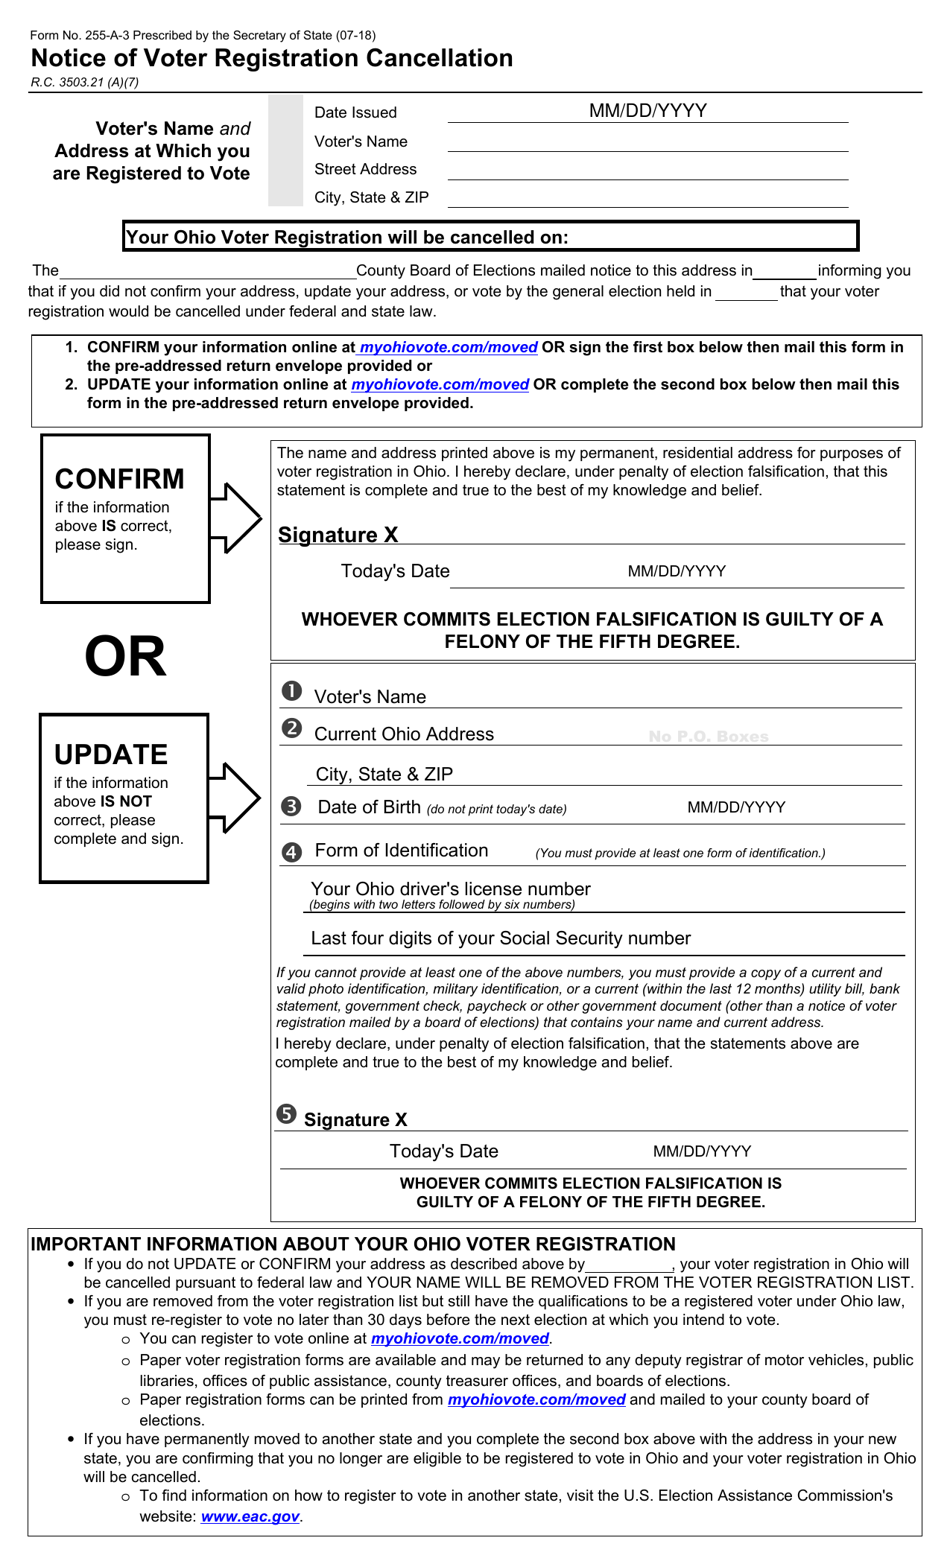 Form 255-A-3 Notice of Voter Registration Cancellation - Ohio, Page 1